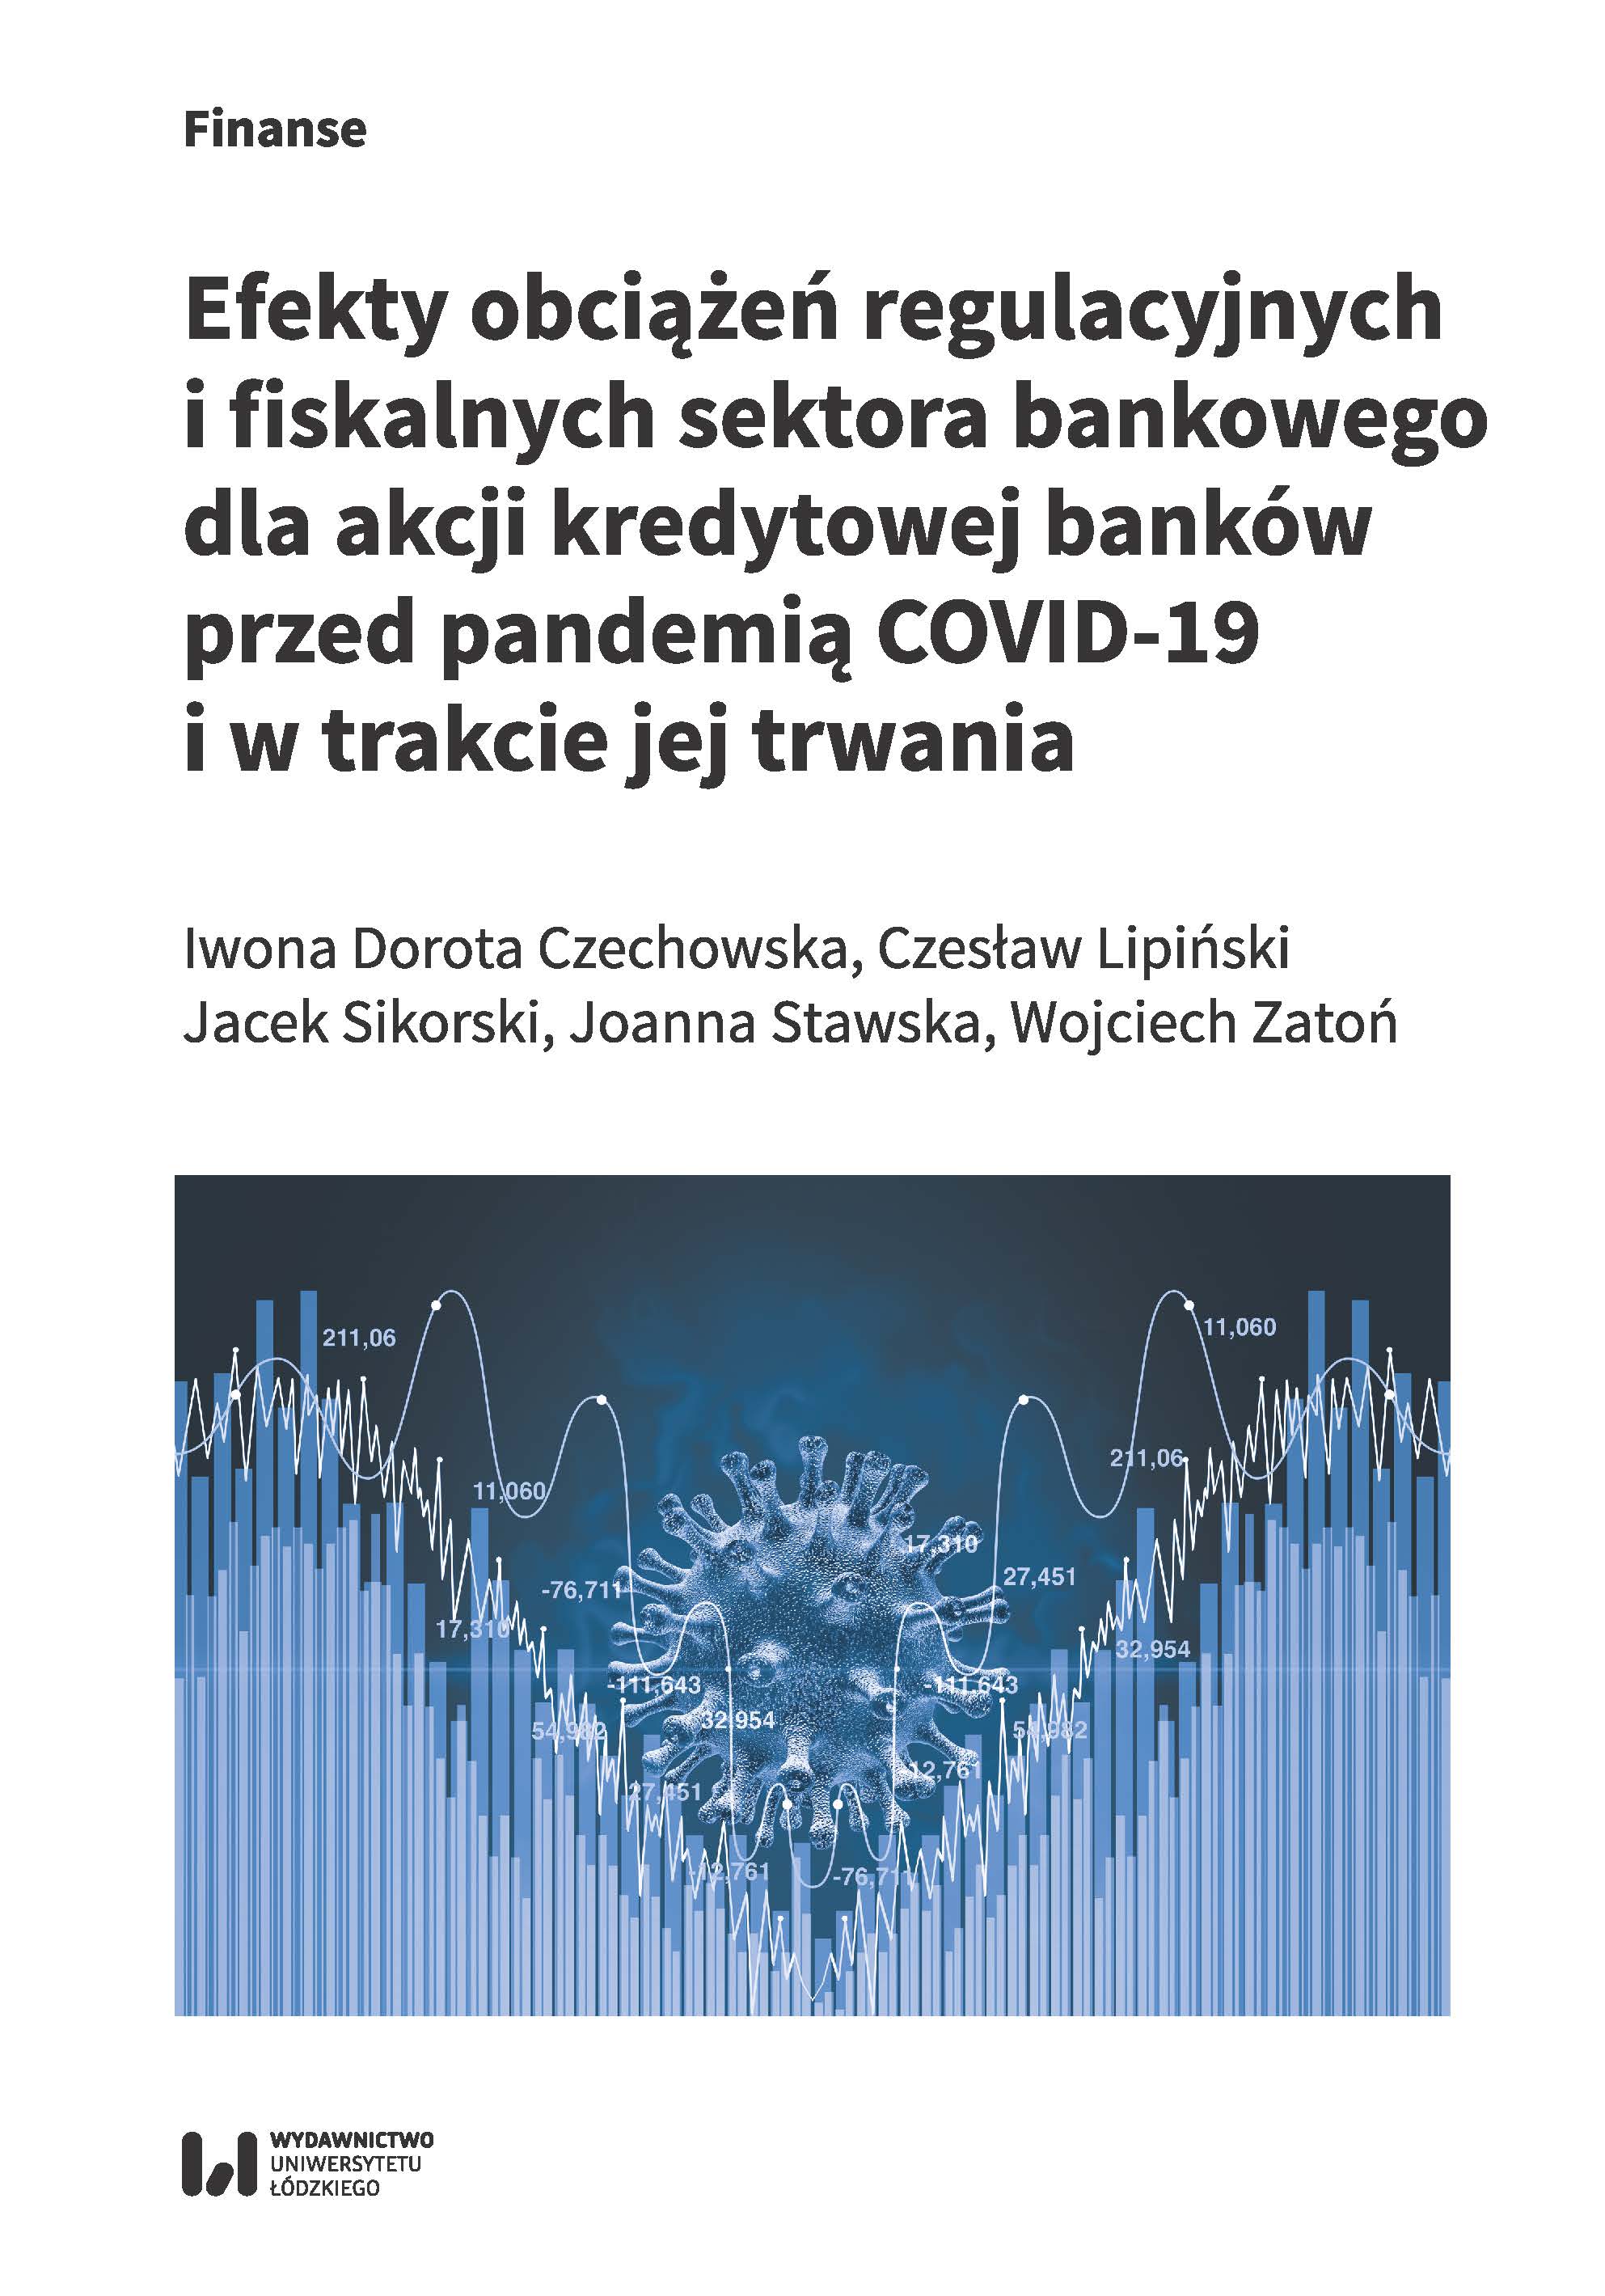 Effects of regulatory and fiscal burdens on the banking sector on bank lending before and during the COVID-19 pandemic